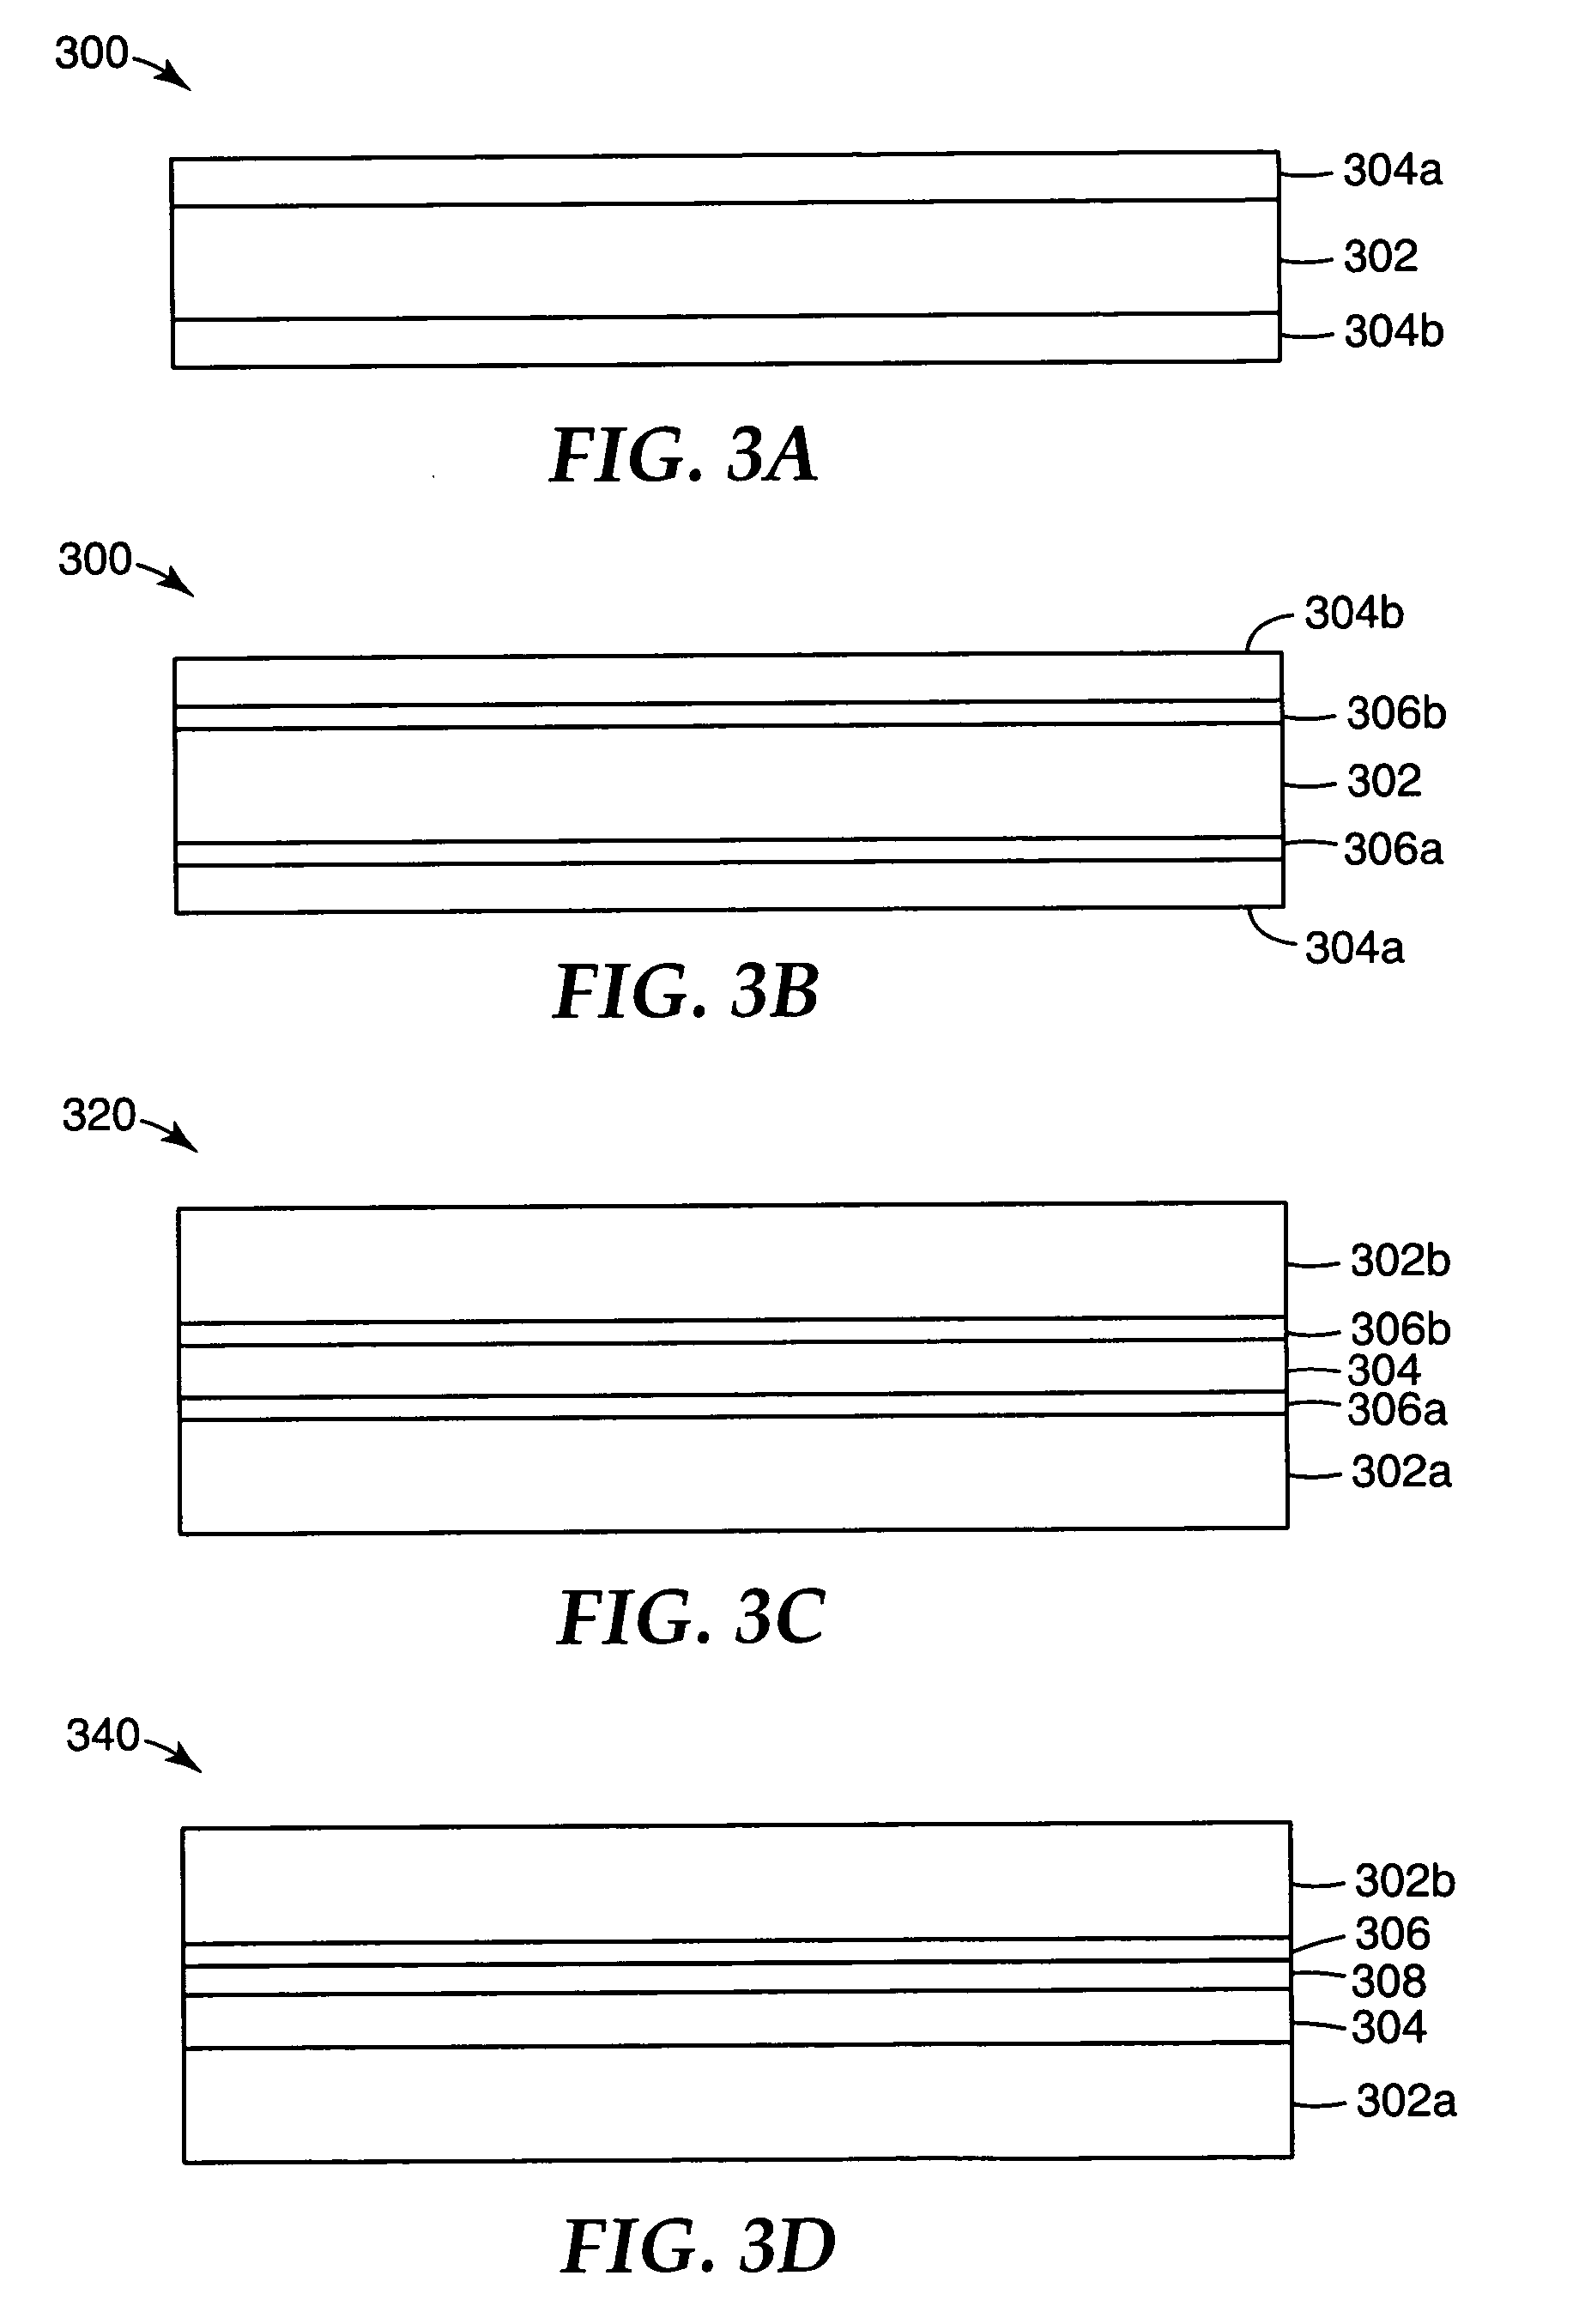 Liquid crystal displays with laminated diffuser plates